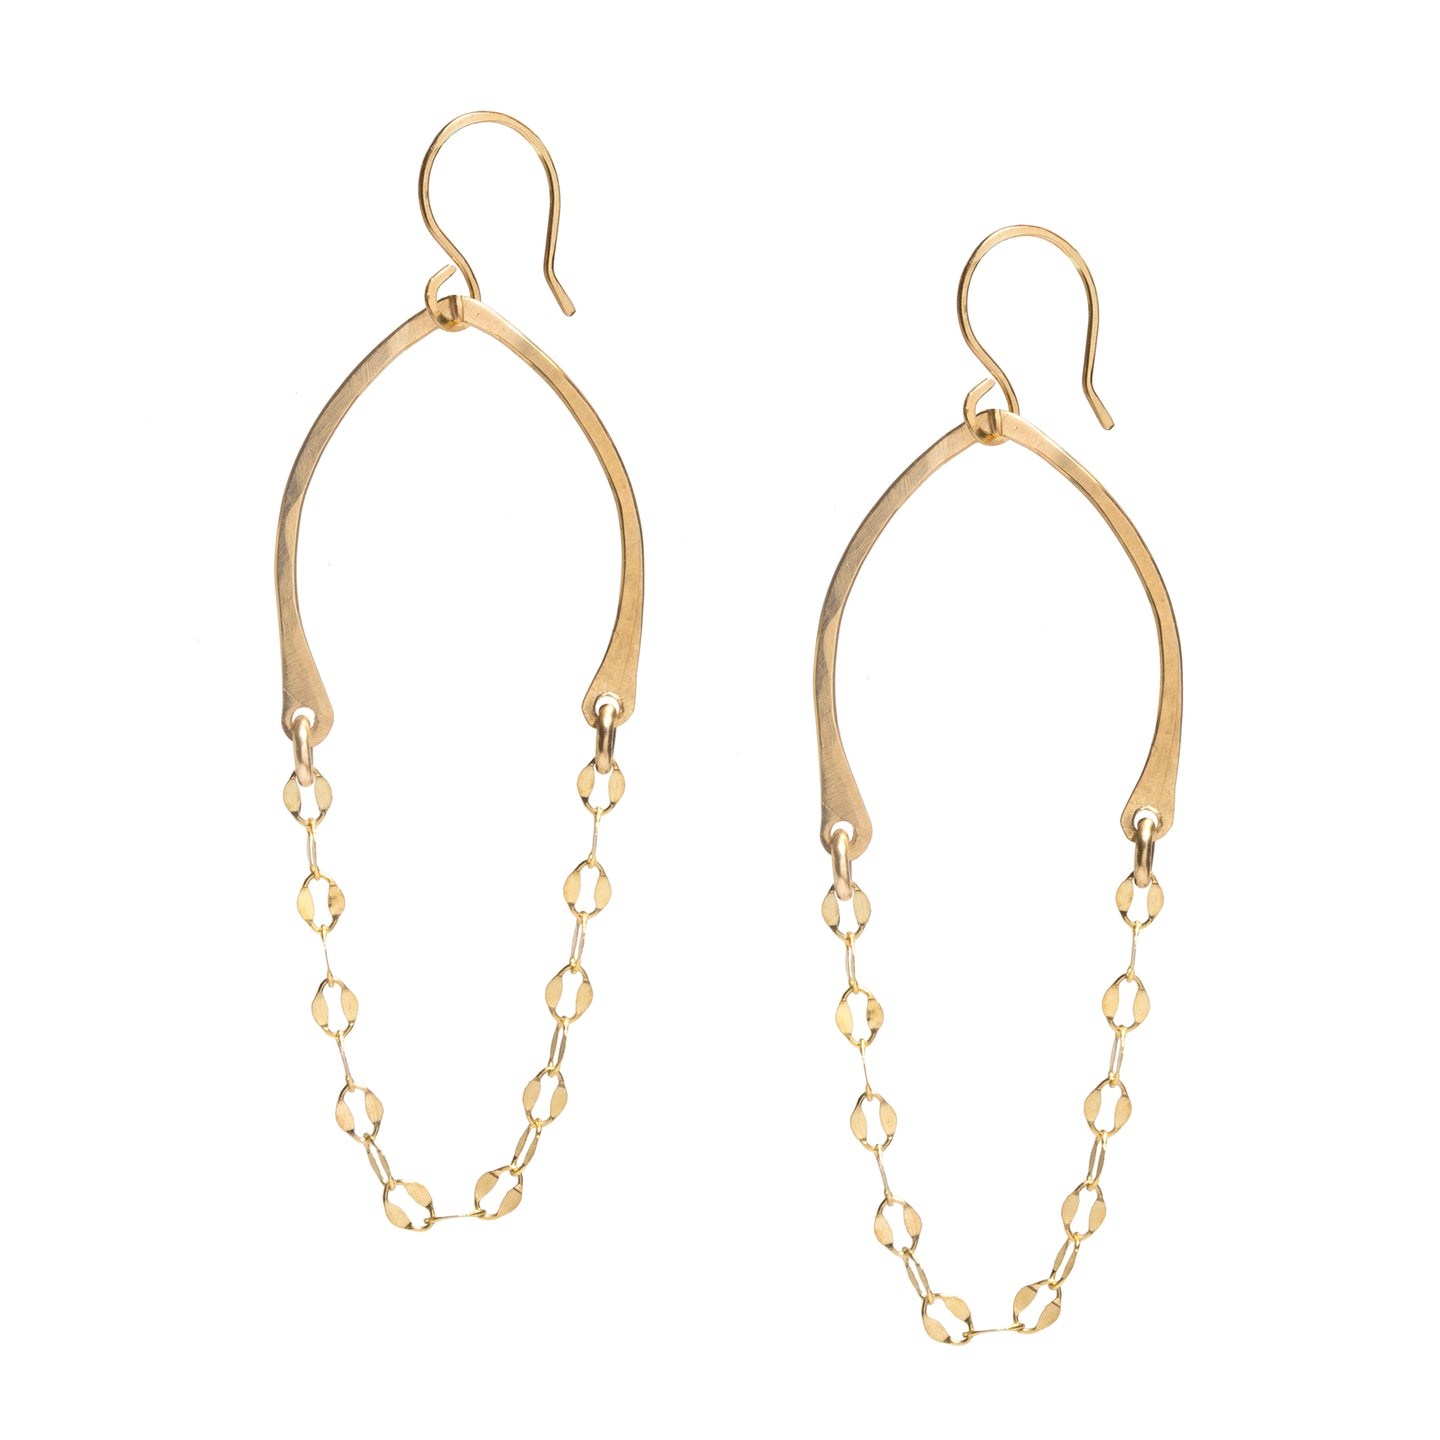 Draped chain mail gold earrings